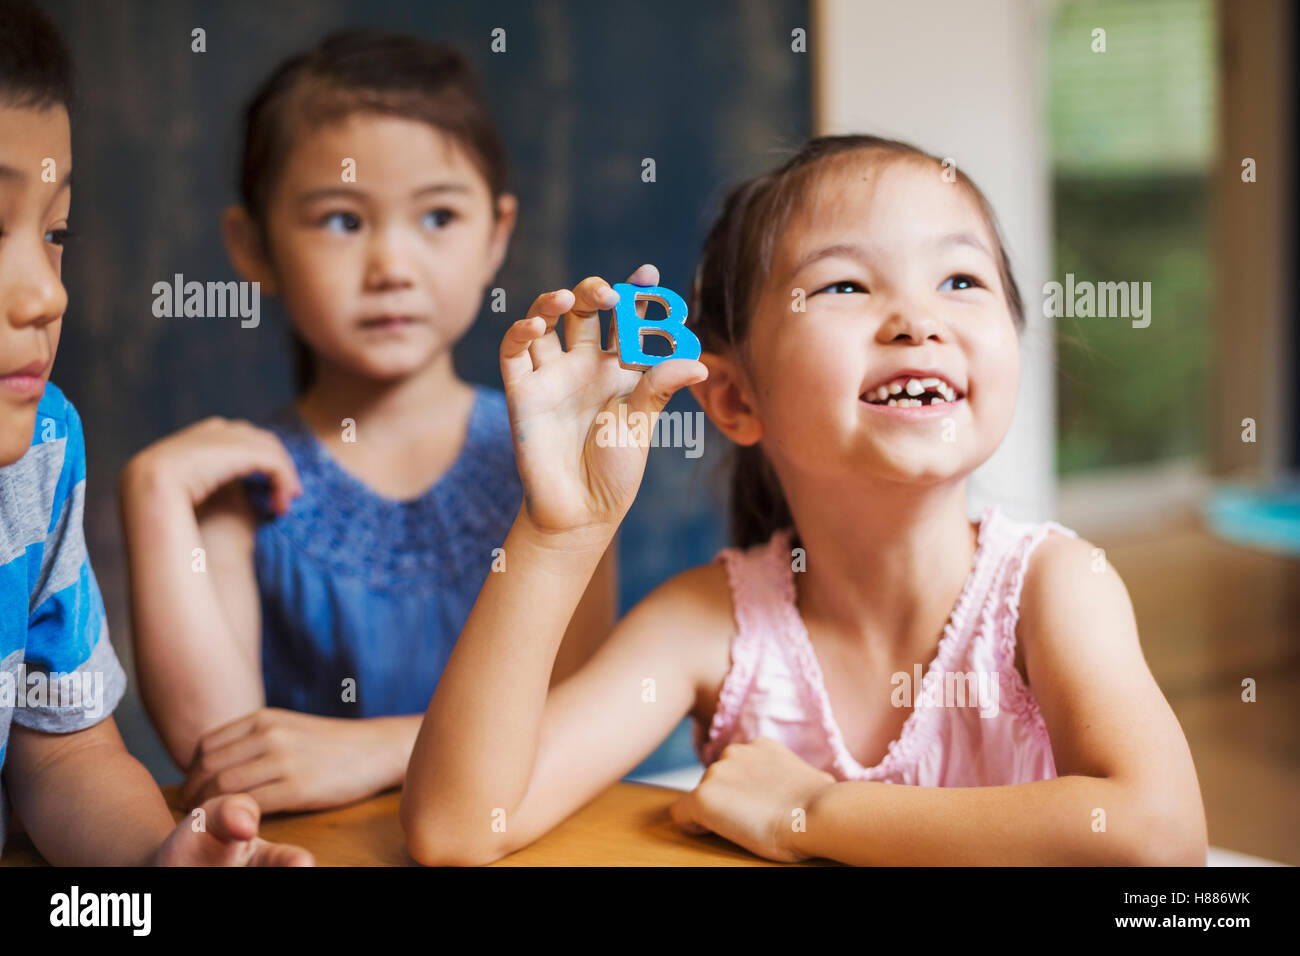 A group of children in school. Two boys and two girls holding up alphabet letters. Stock Photo